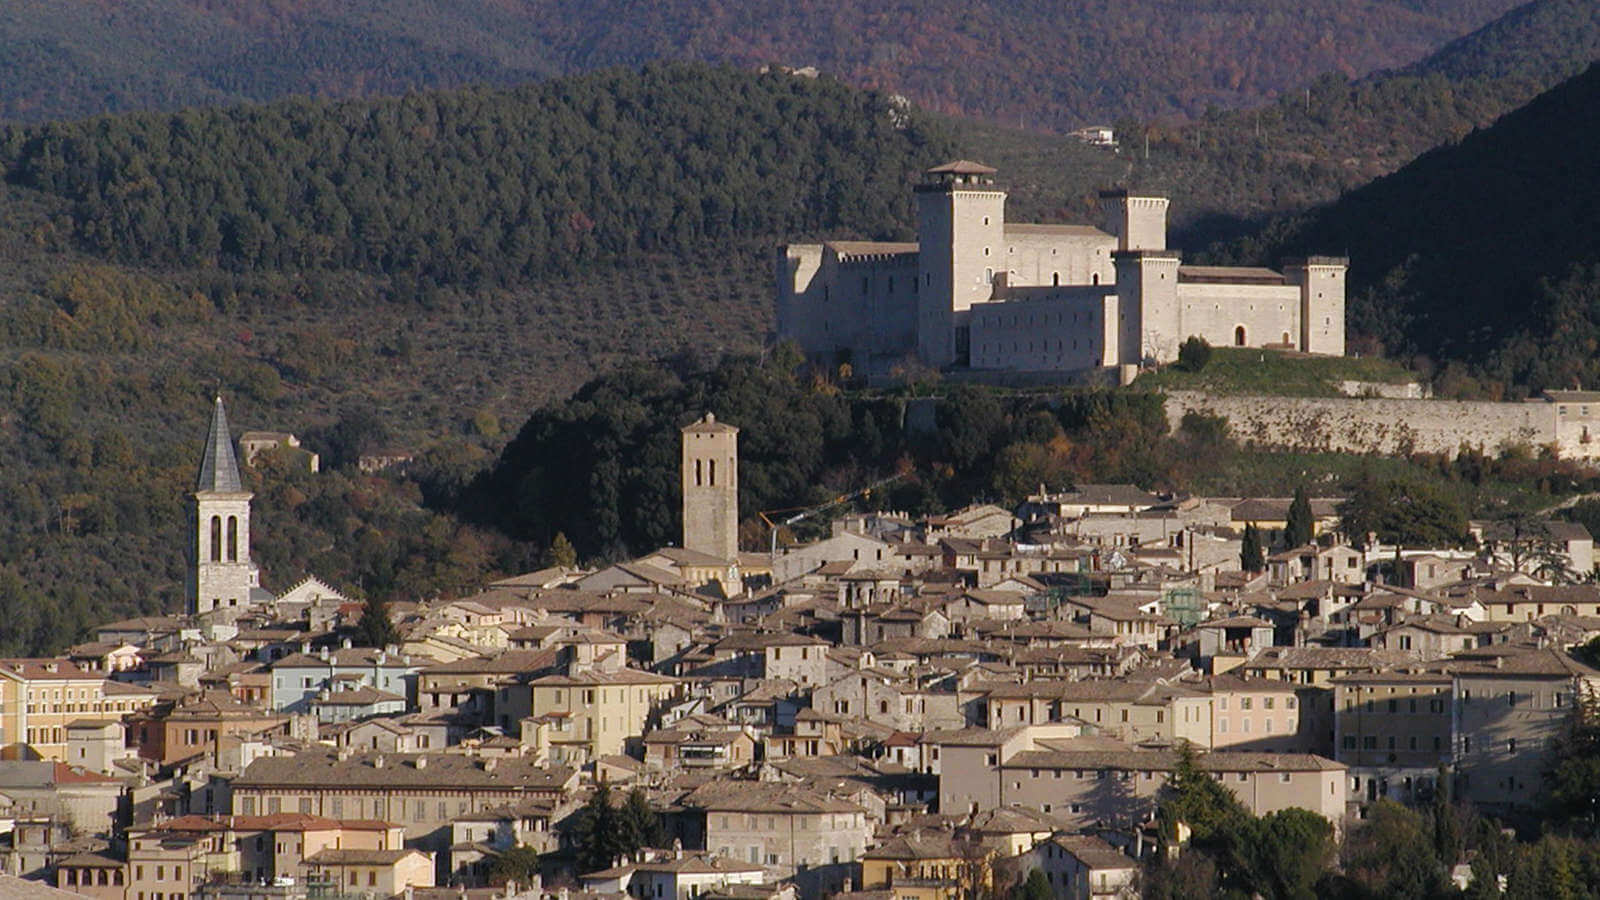 The Fortress of Spoleto